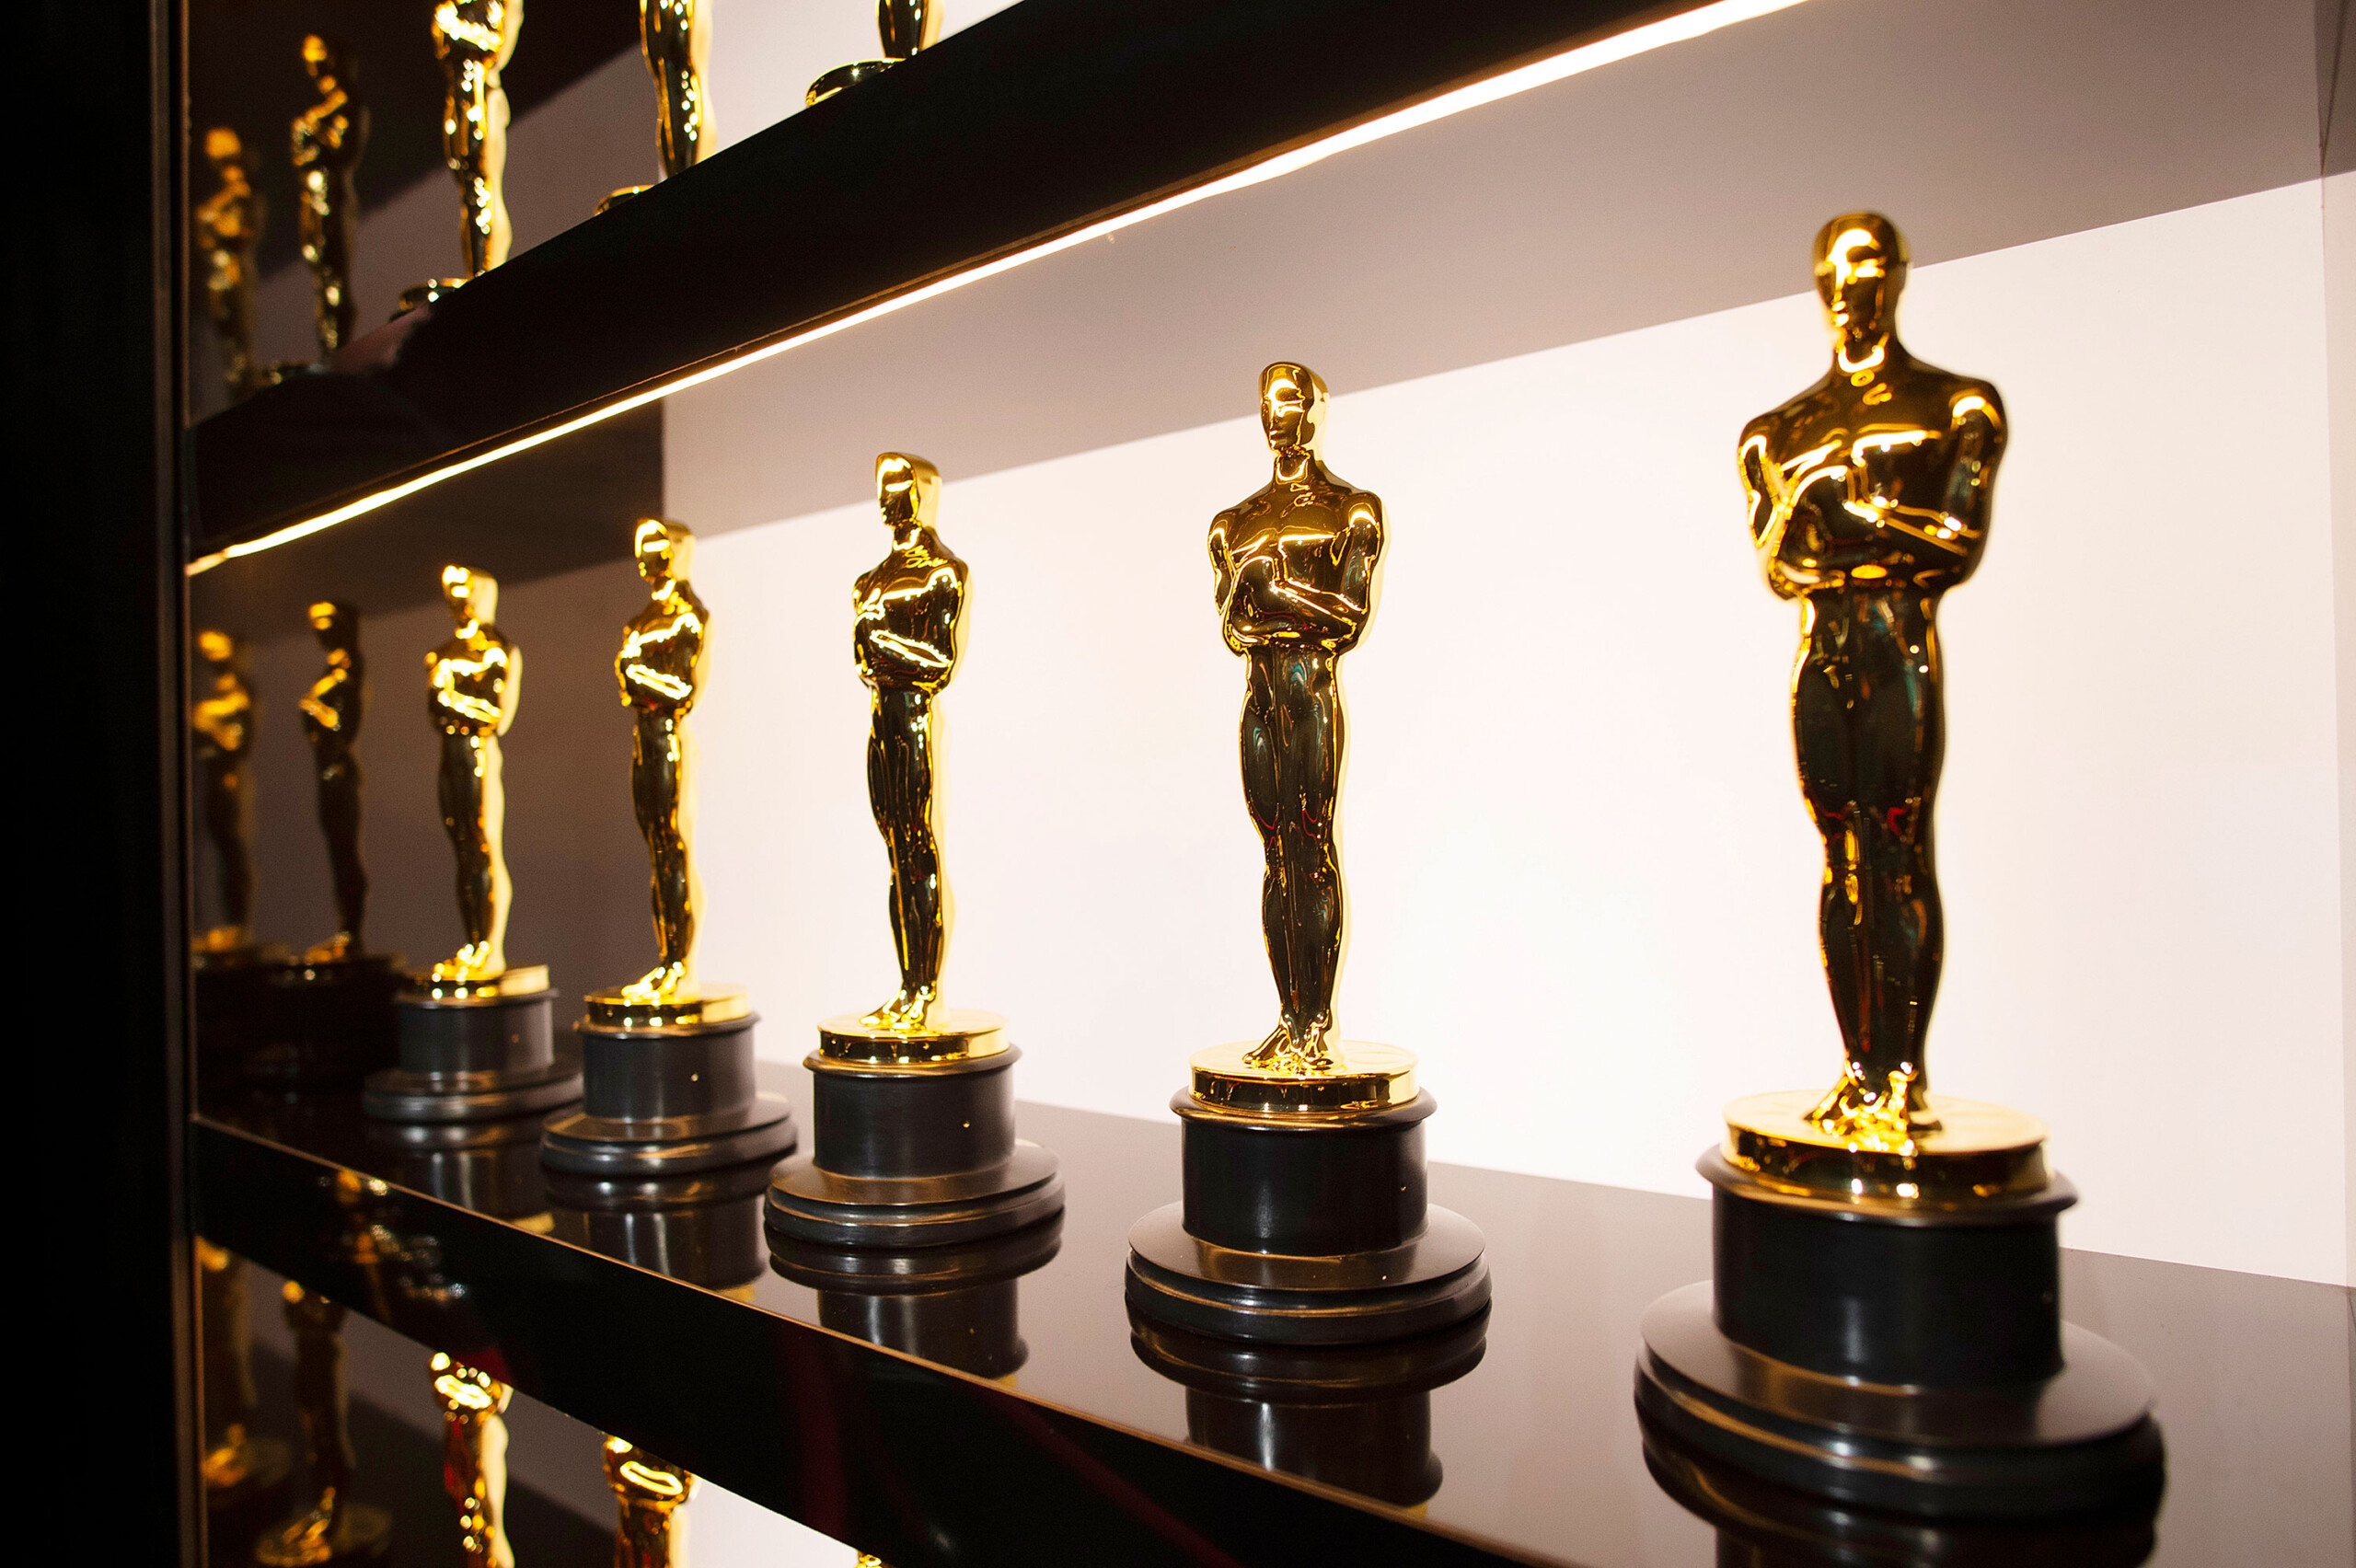 Oscar Nominations 2021: See the Full List